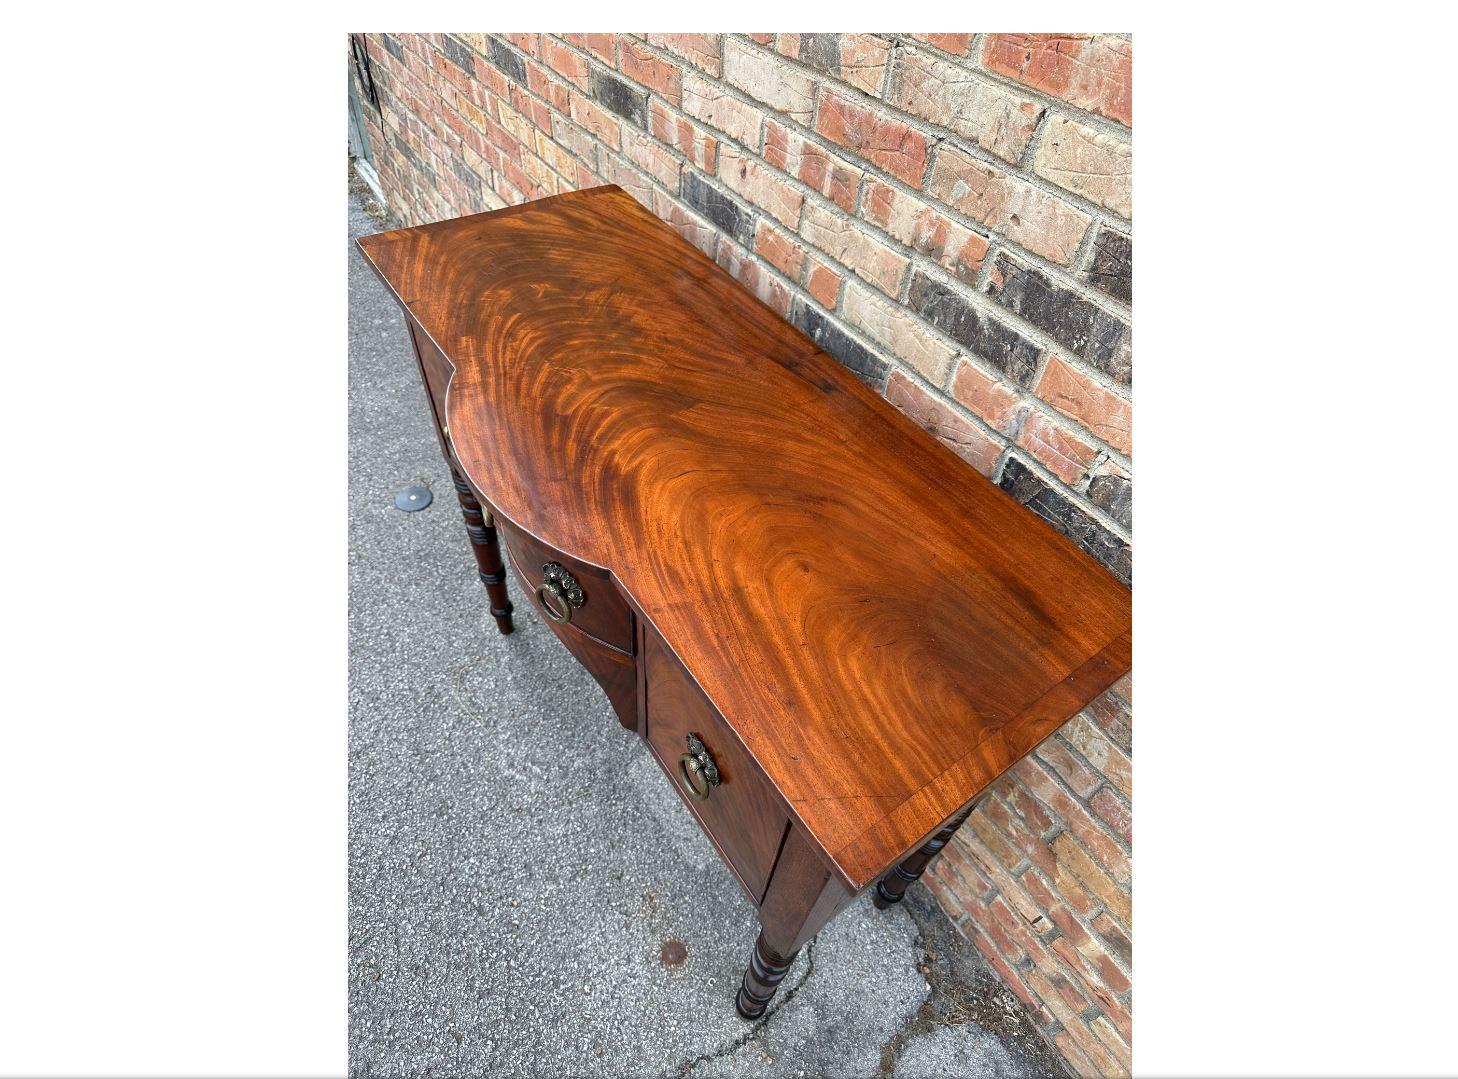 This is a beautiful English brandy board! Dating to the 19th century, it has lovely gloss and patina that accentuates the natural beauty of the wood. There are two deep drawers on either side, with a smaller drawer in the curved center. The legs